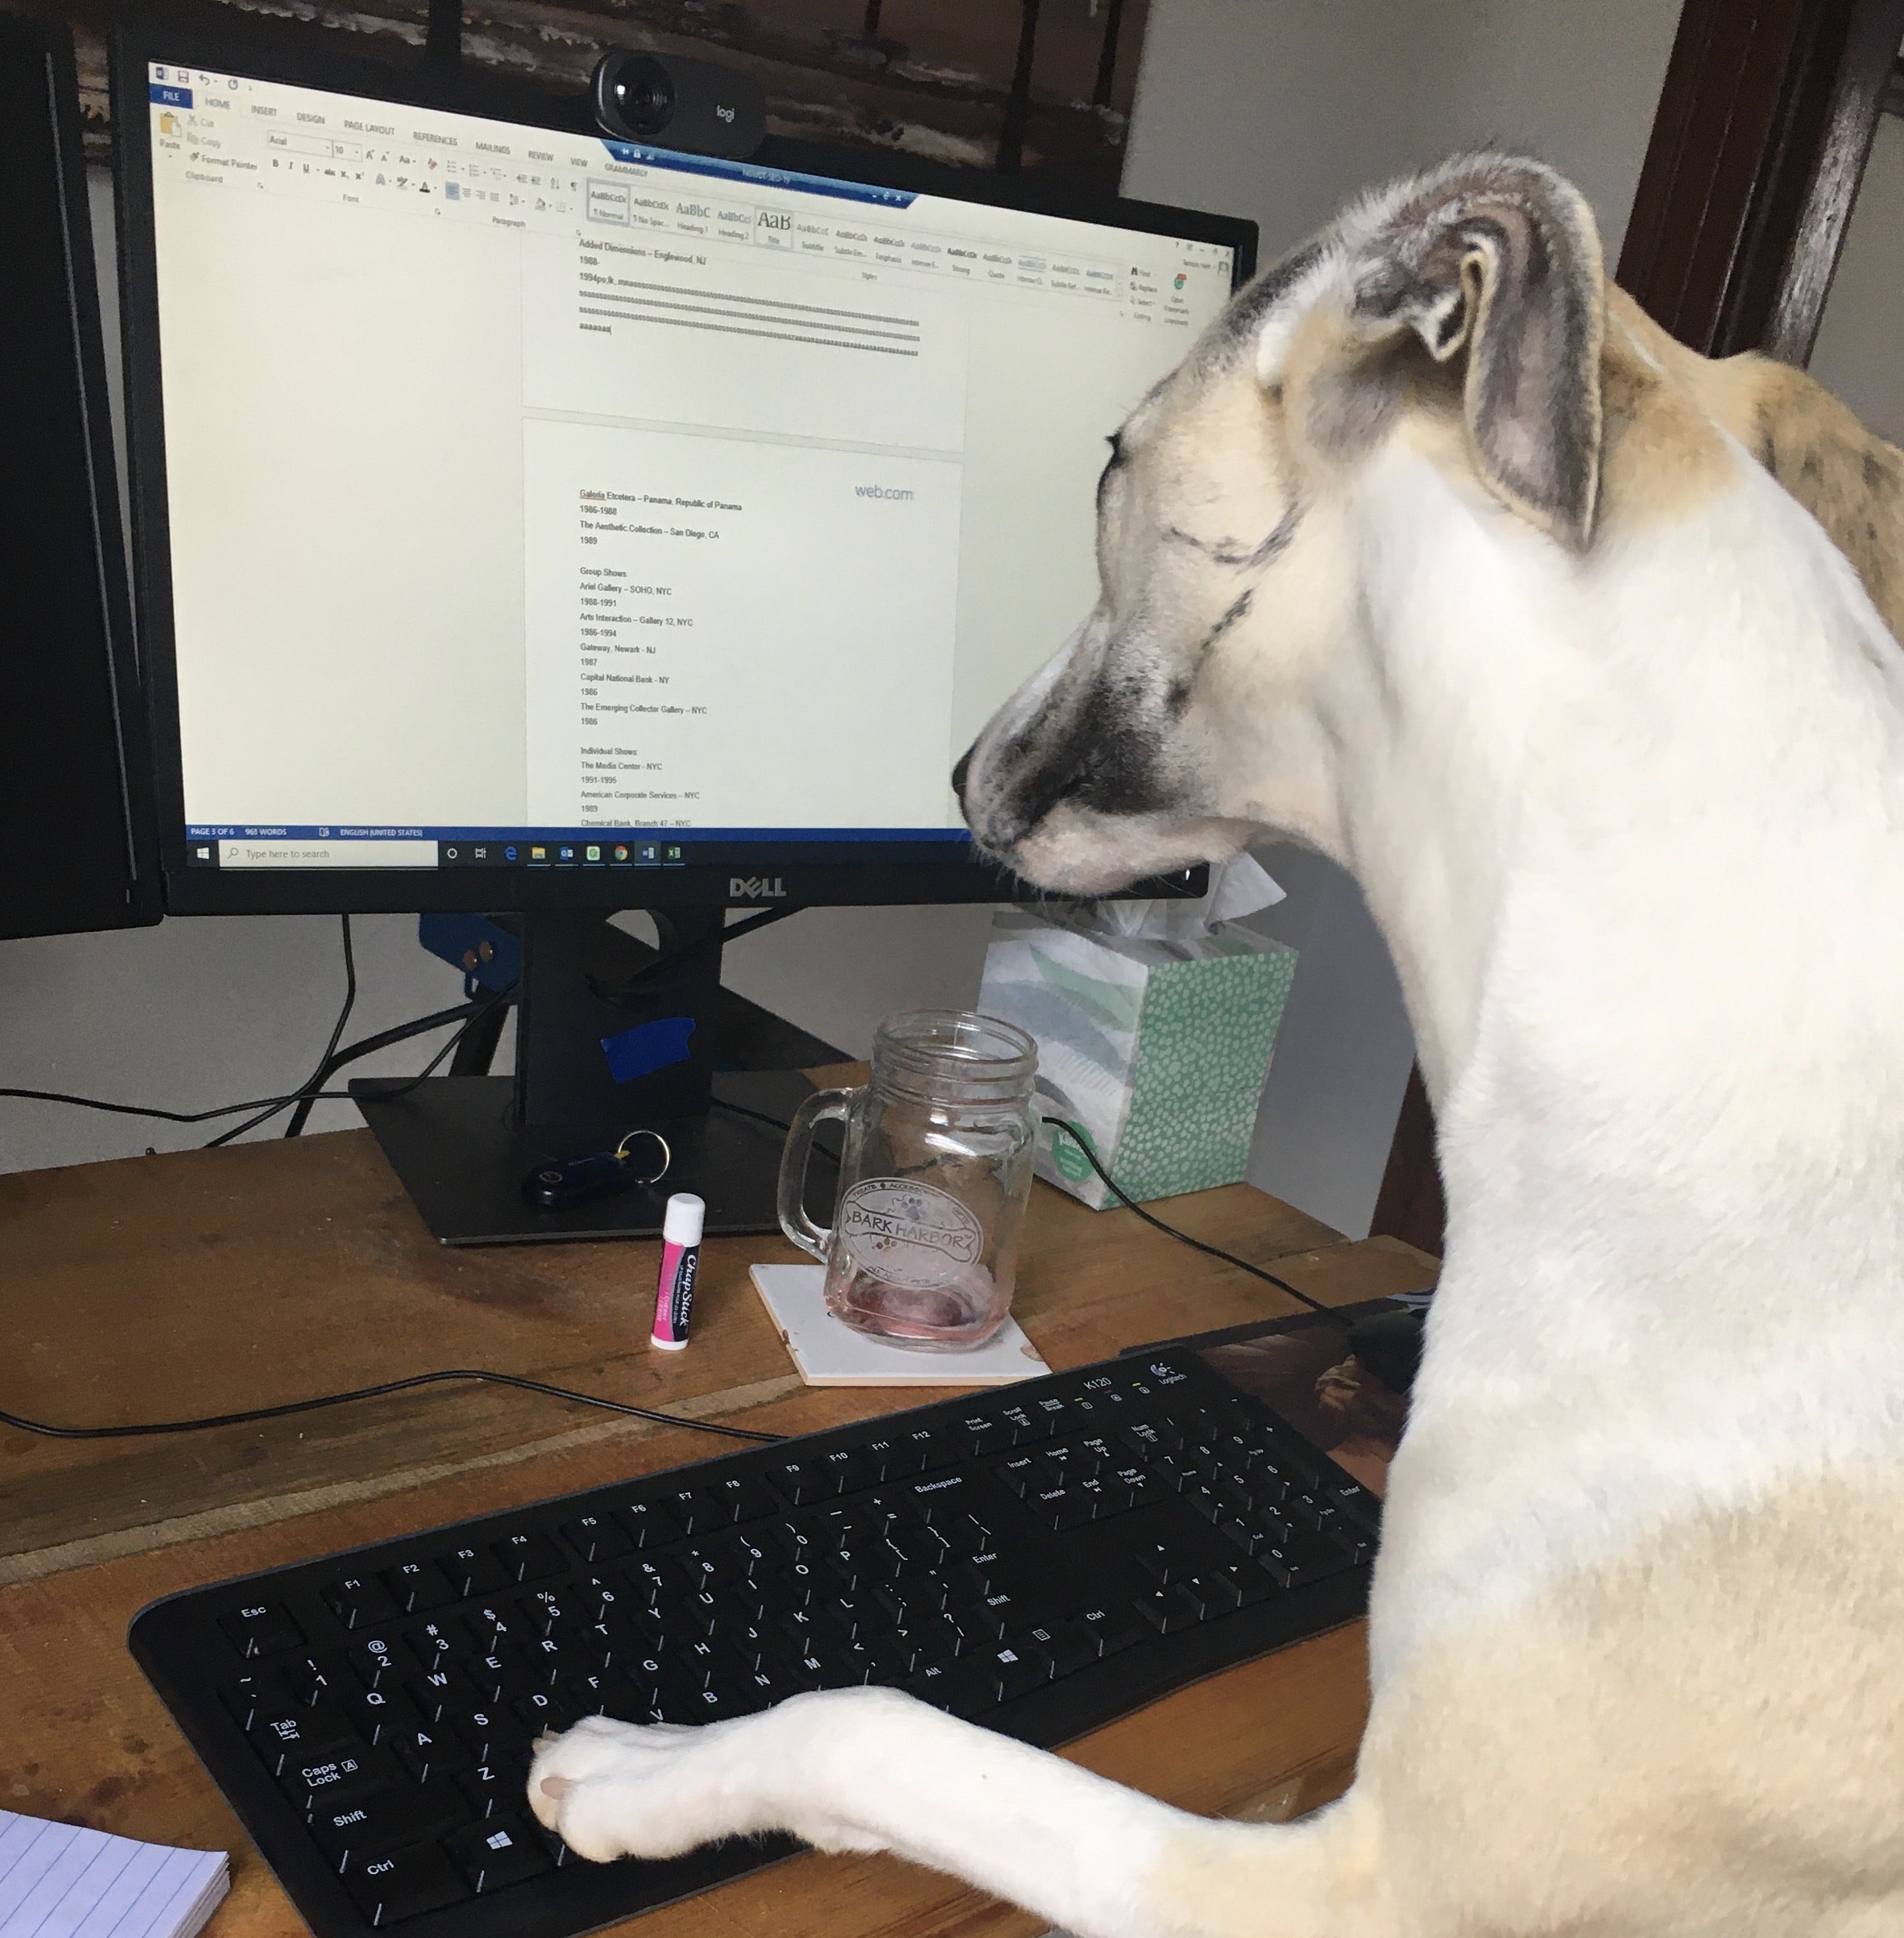 A Whippet sitting at a computer